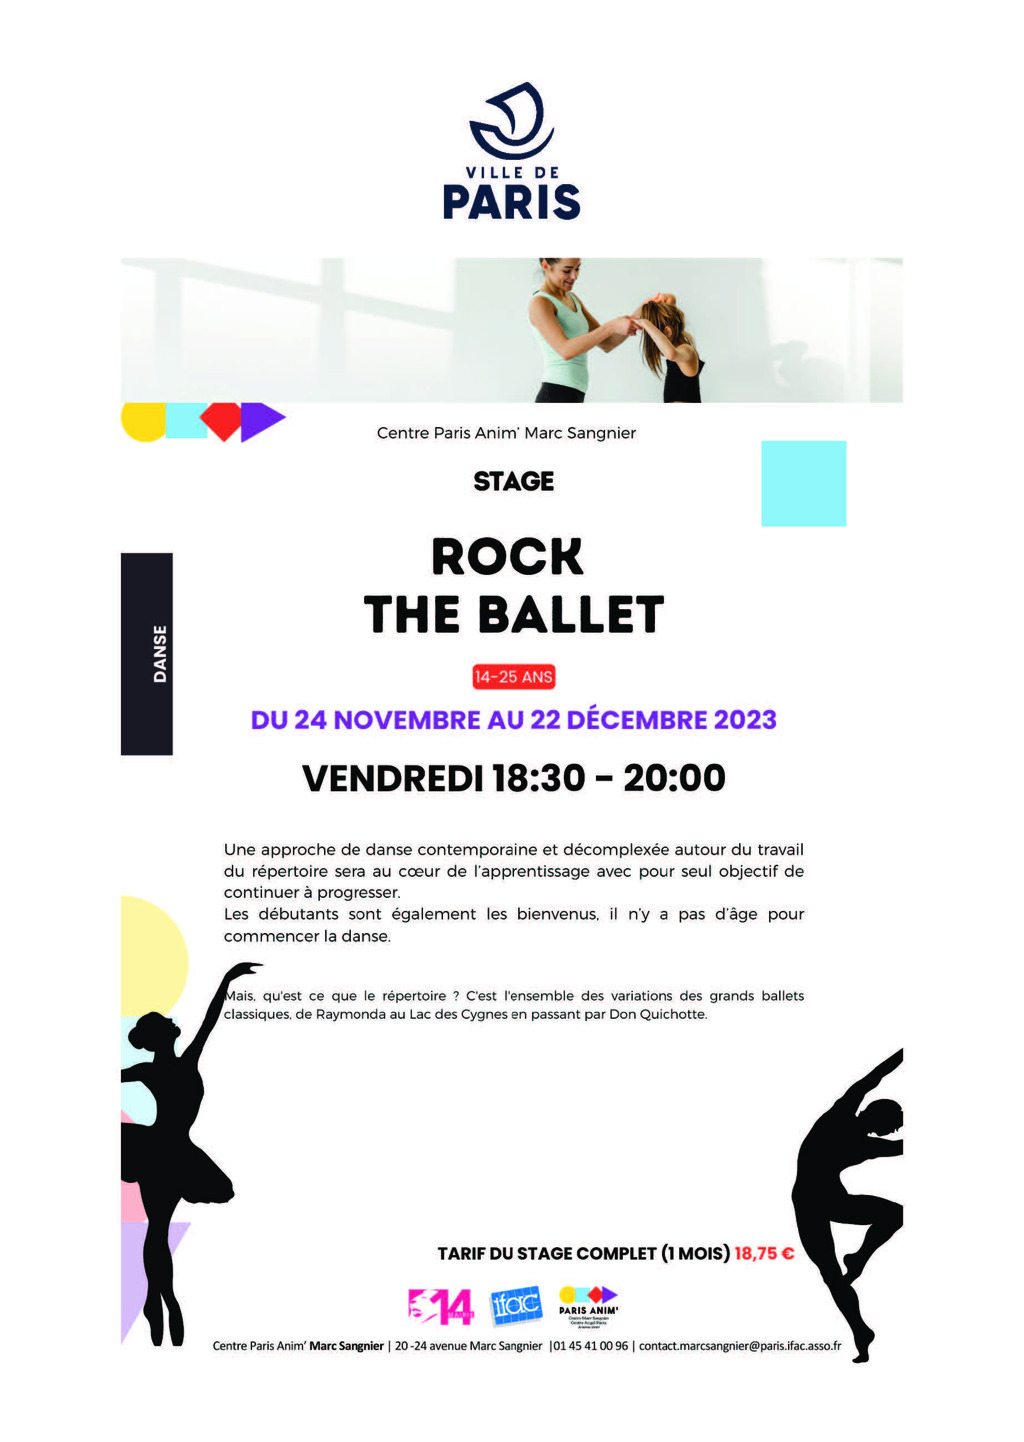 Stage : Rock the Ballet